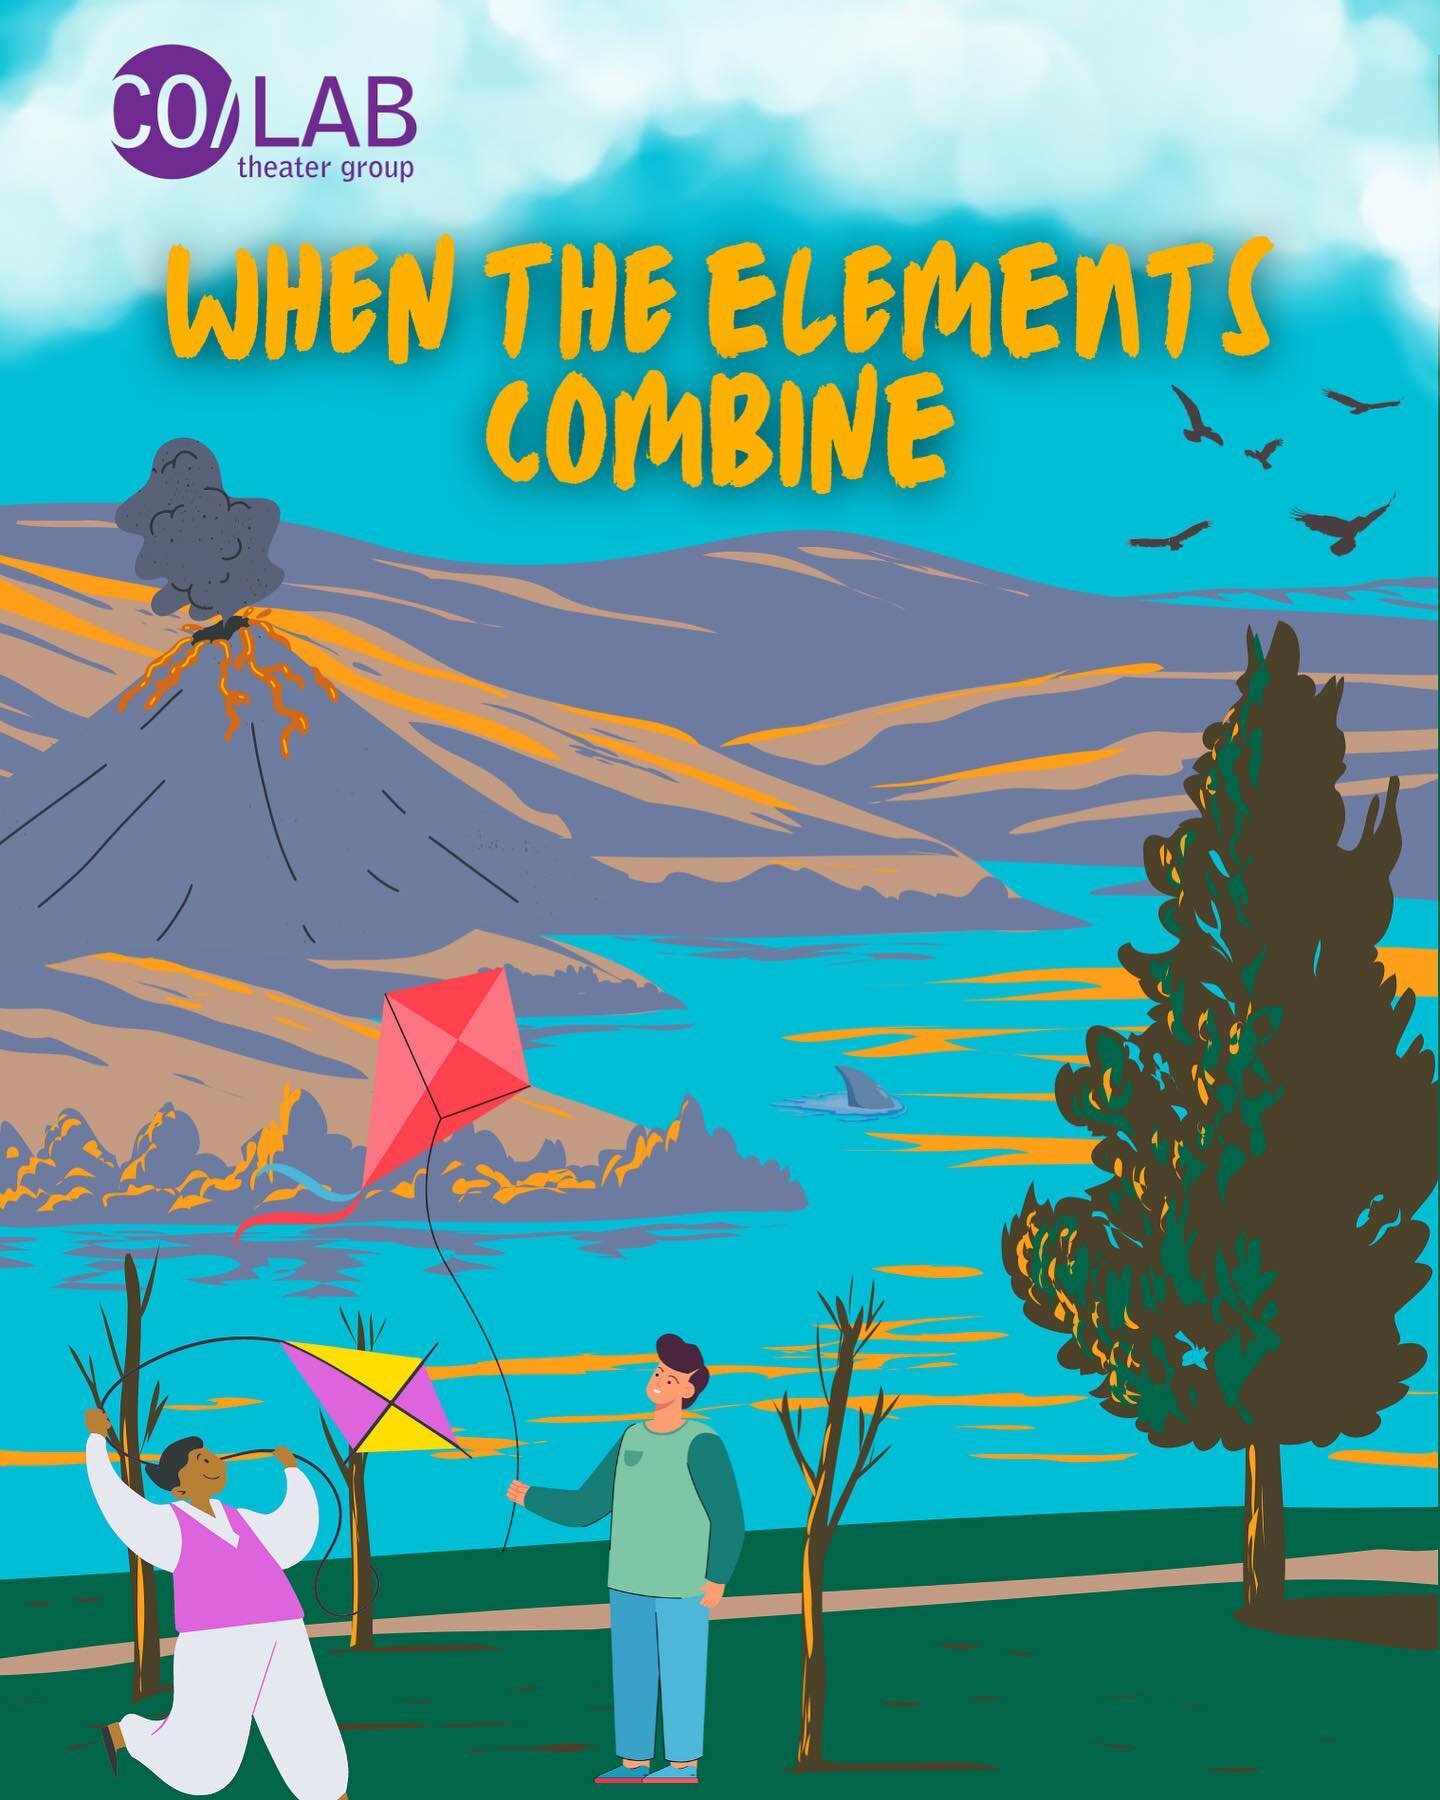 Tickets are on sale for our Spring ensemble showcase! Immerse yourselves in the wonders of nature as we explore earth, fire, air and water in WHEN THE ELEMENTS COMBINE. The Wednesday Ensemble Theater, Saturday Ensemble Theater, Musical Theater Ensemb